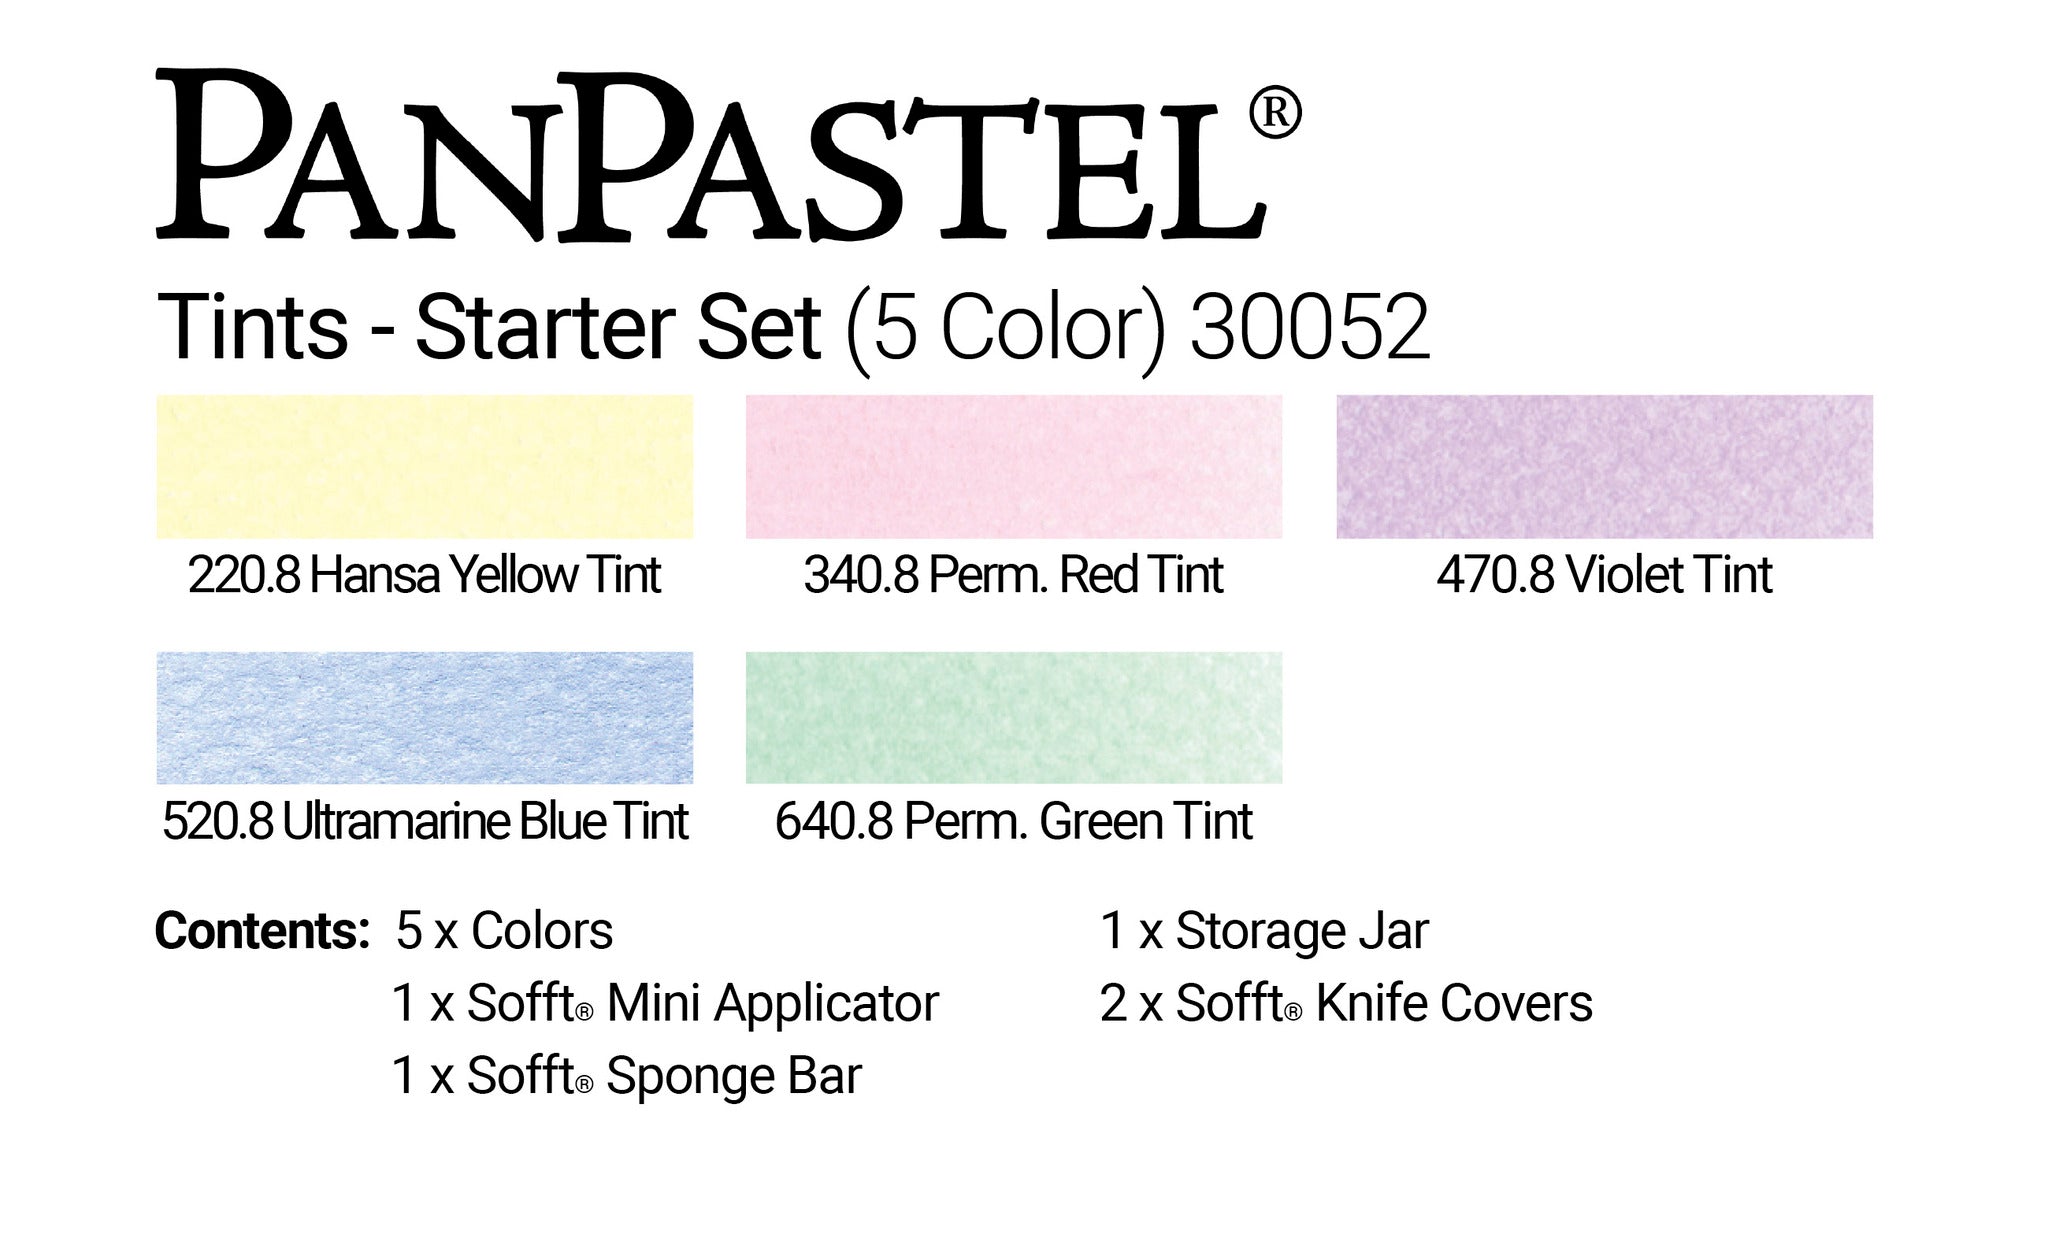 PanPastel 5 Colour Starter Set Tints 30052, soft pastel colours offer a gentle subtle veil of colour. Gorgeous selection of tints with a small selection of application and blending Sofft tools. 